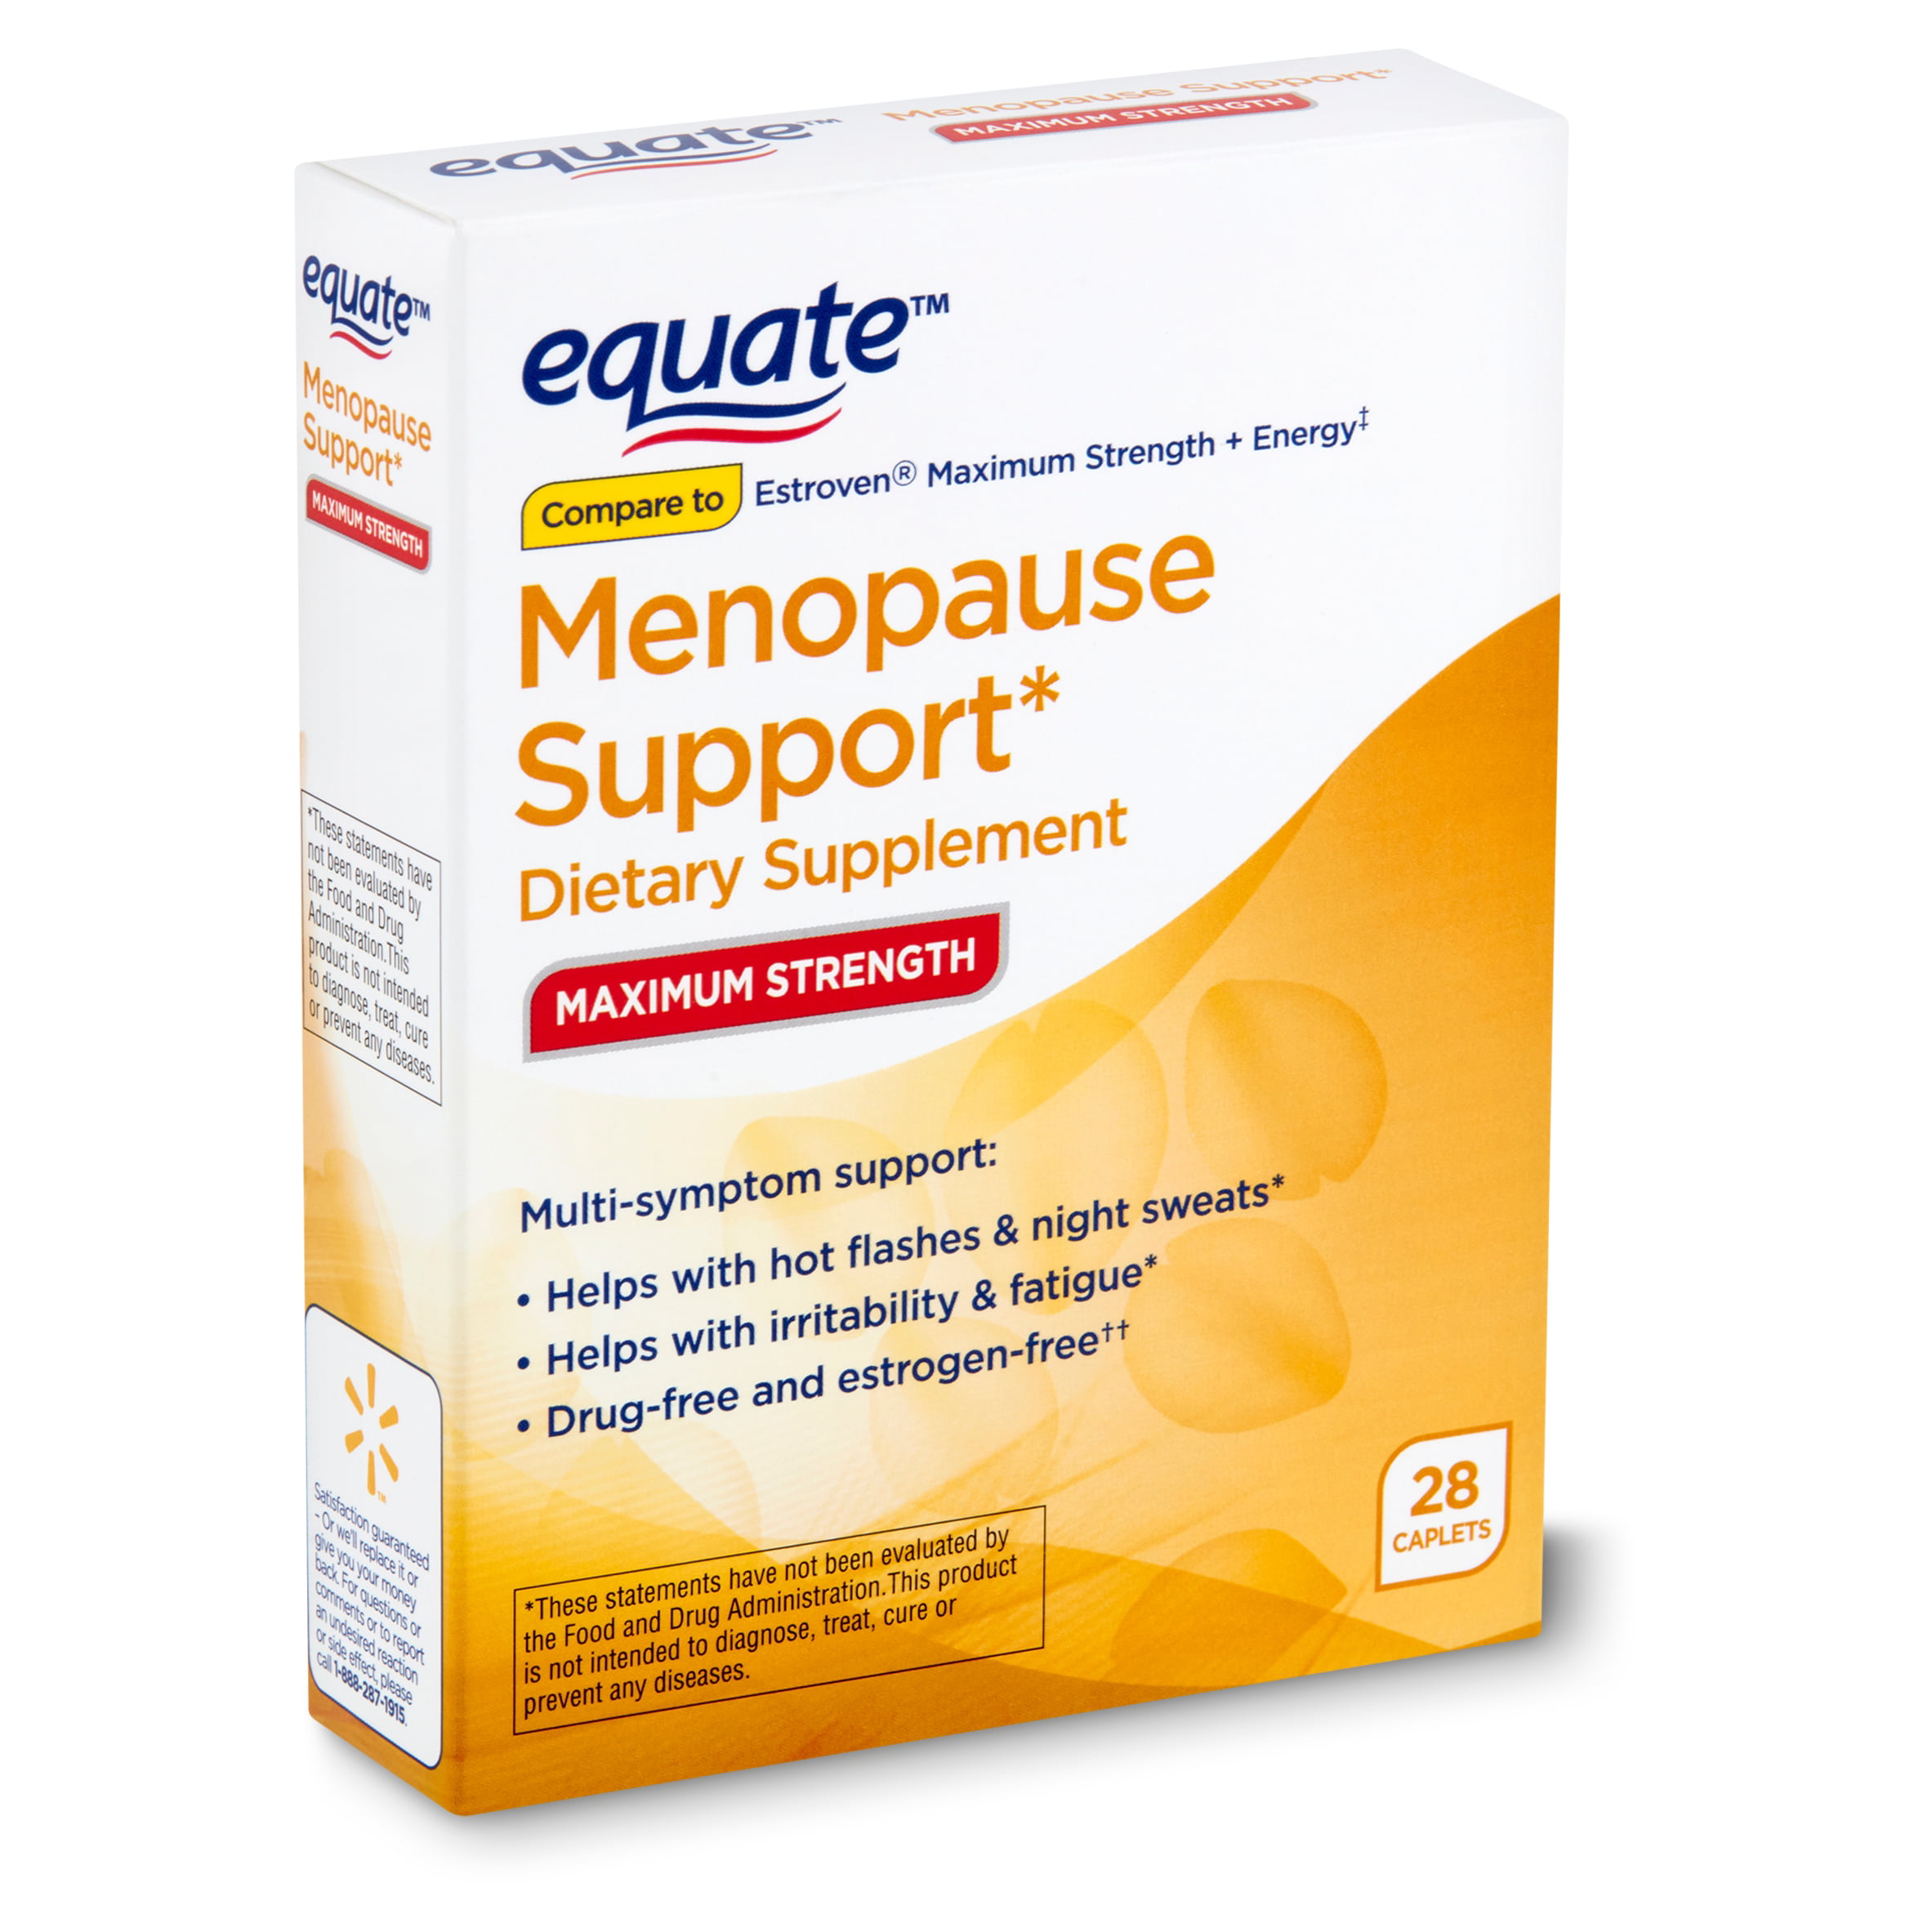 Menopause support капсулы. Menopause support. Menopause support 90 VCAPS. Now menopause support, 90 VCAPS. Strength of Pills.